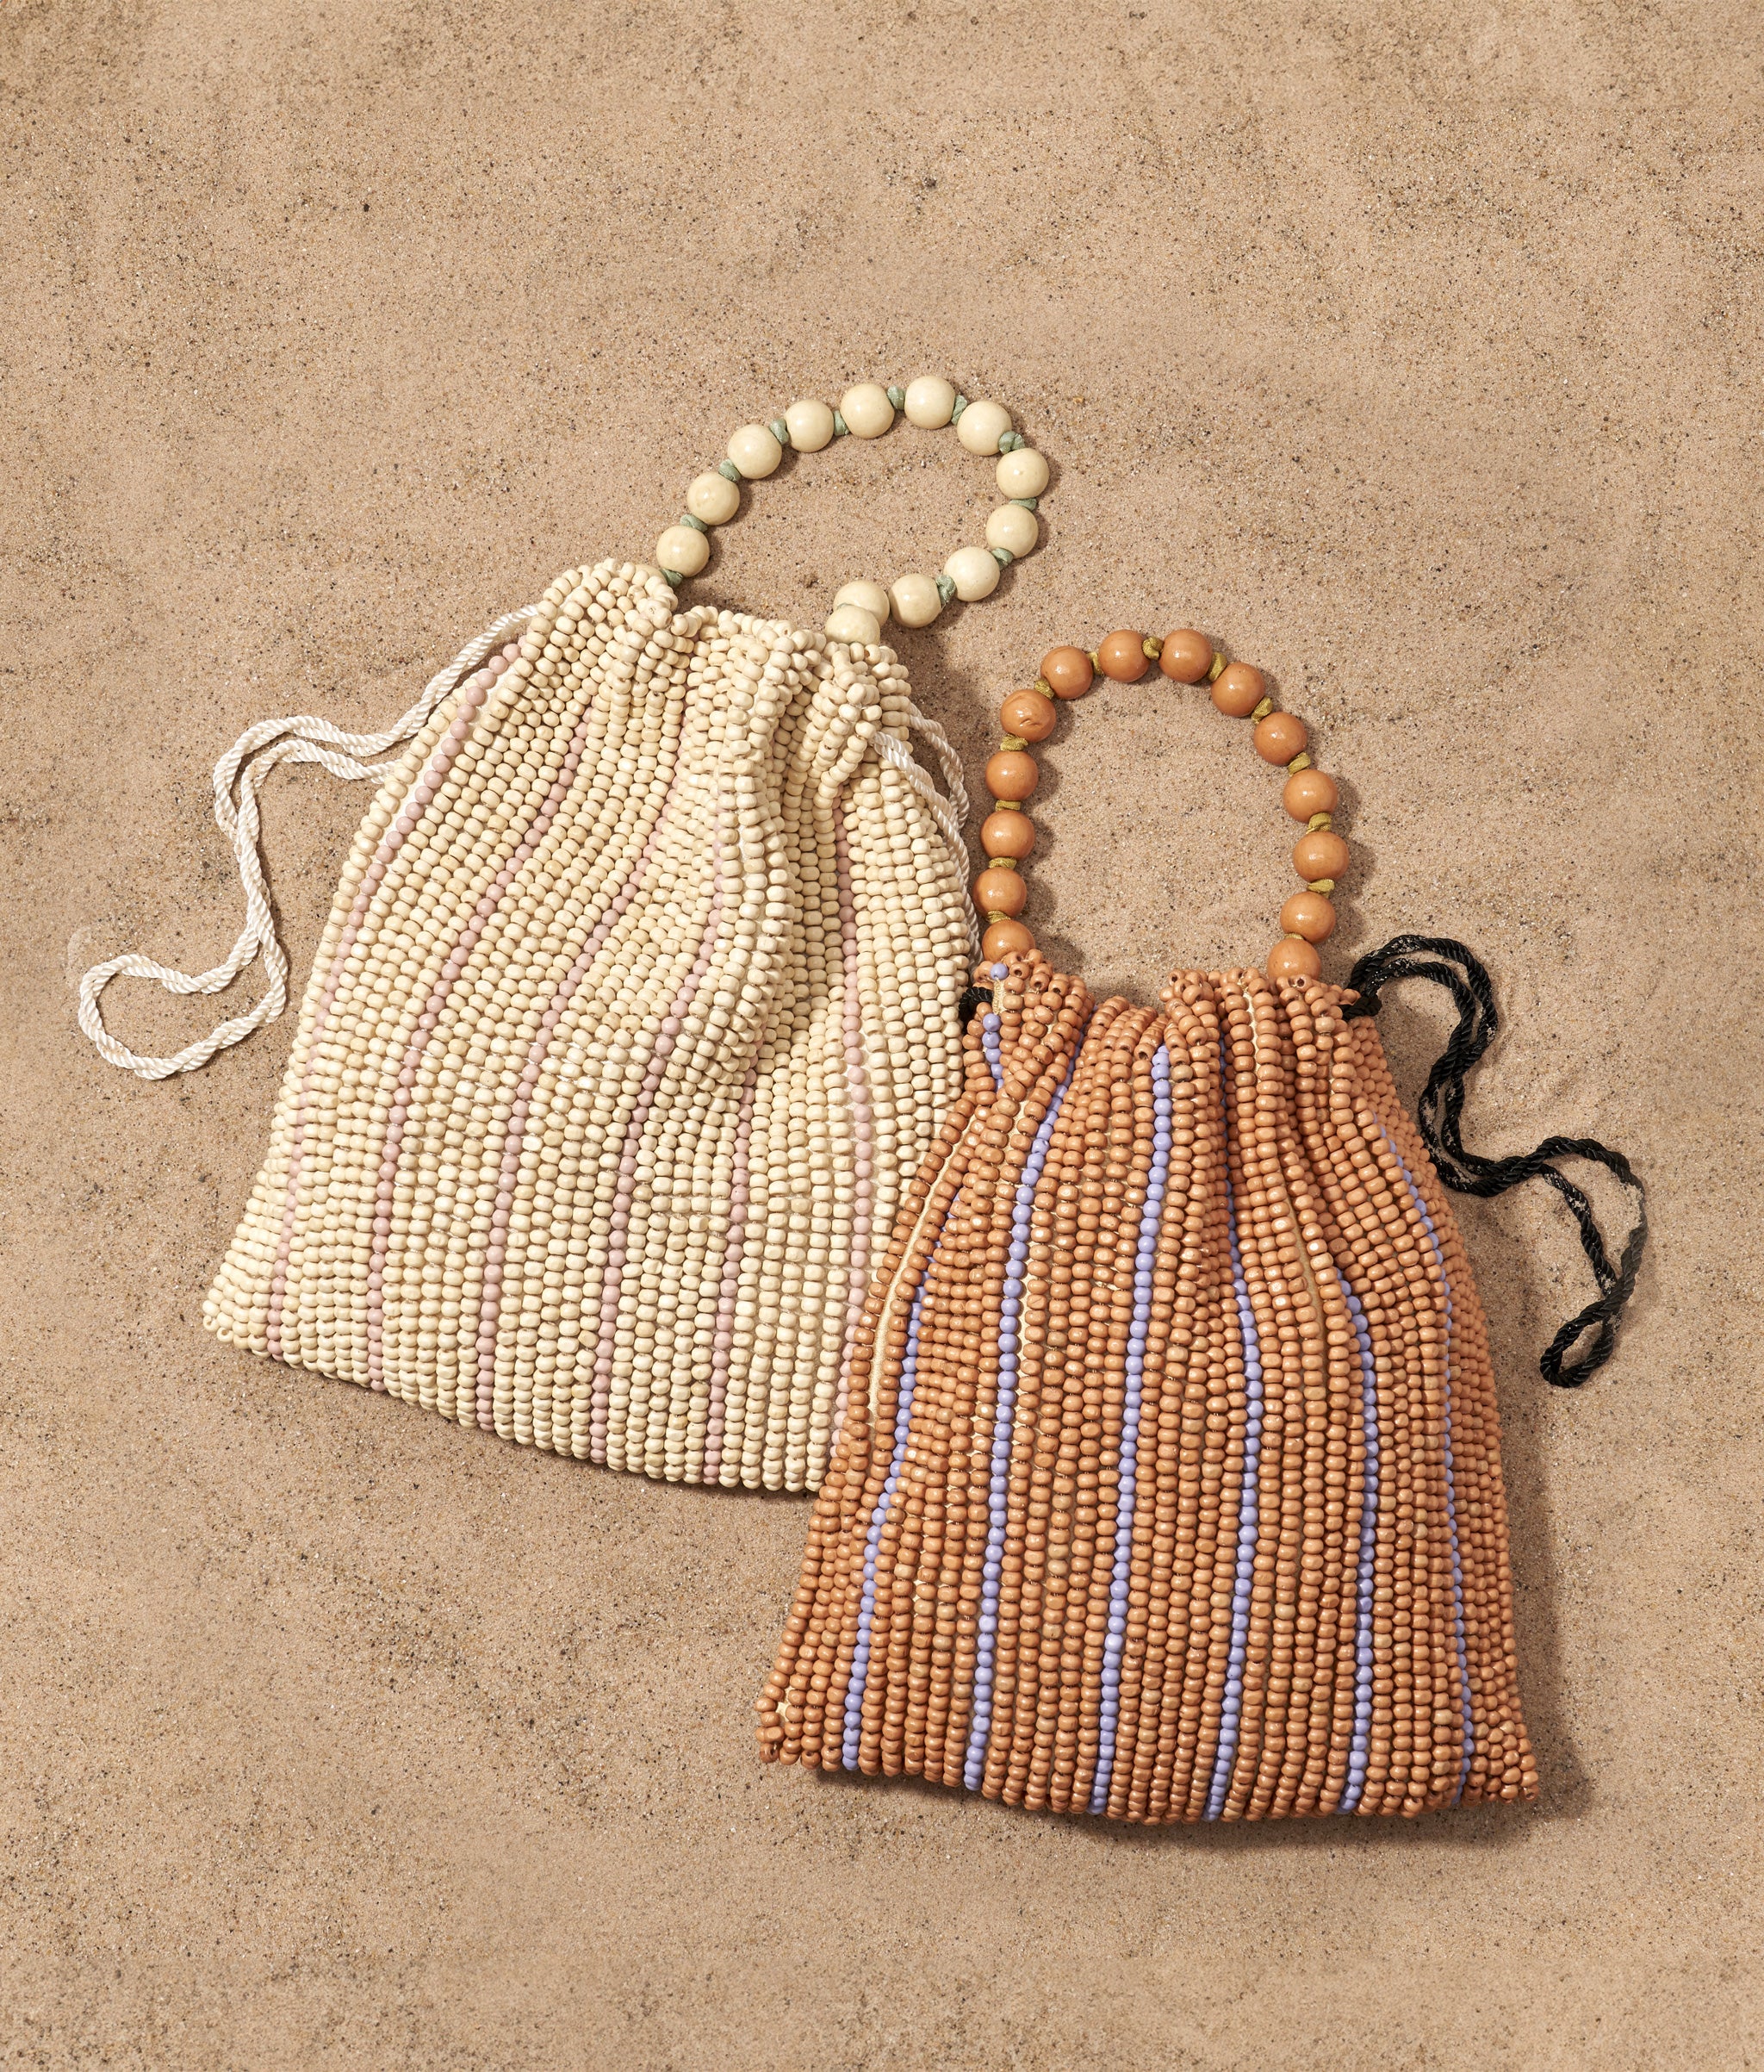 Getaway Bags in Desert Tan and White Heat on a sand background.